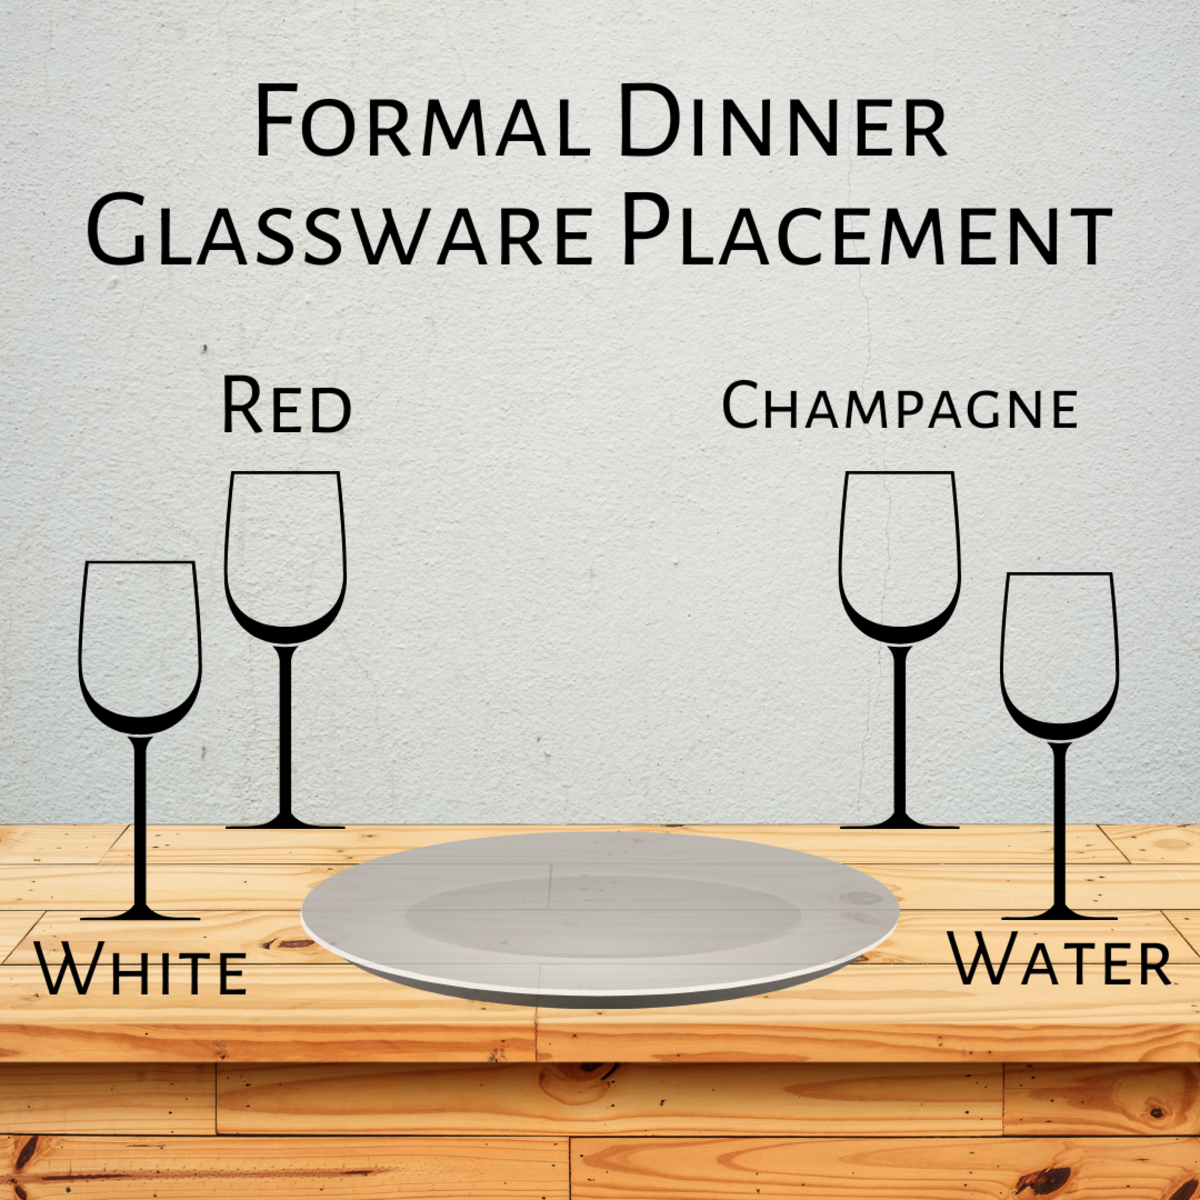 Traditional glassware placement at a formal dinner